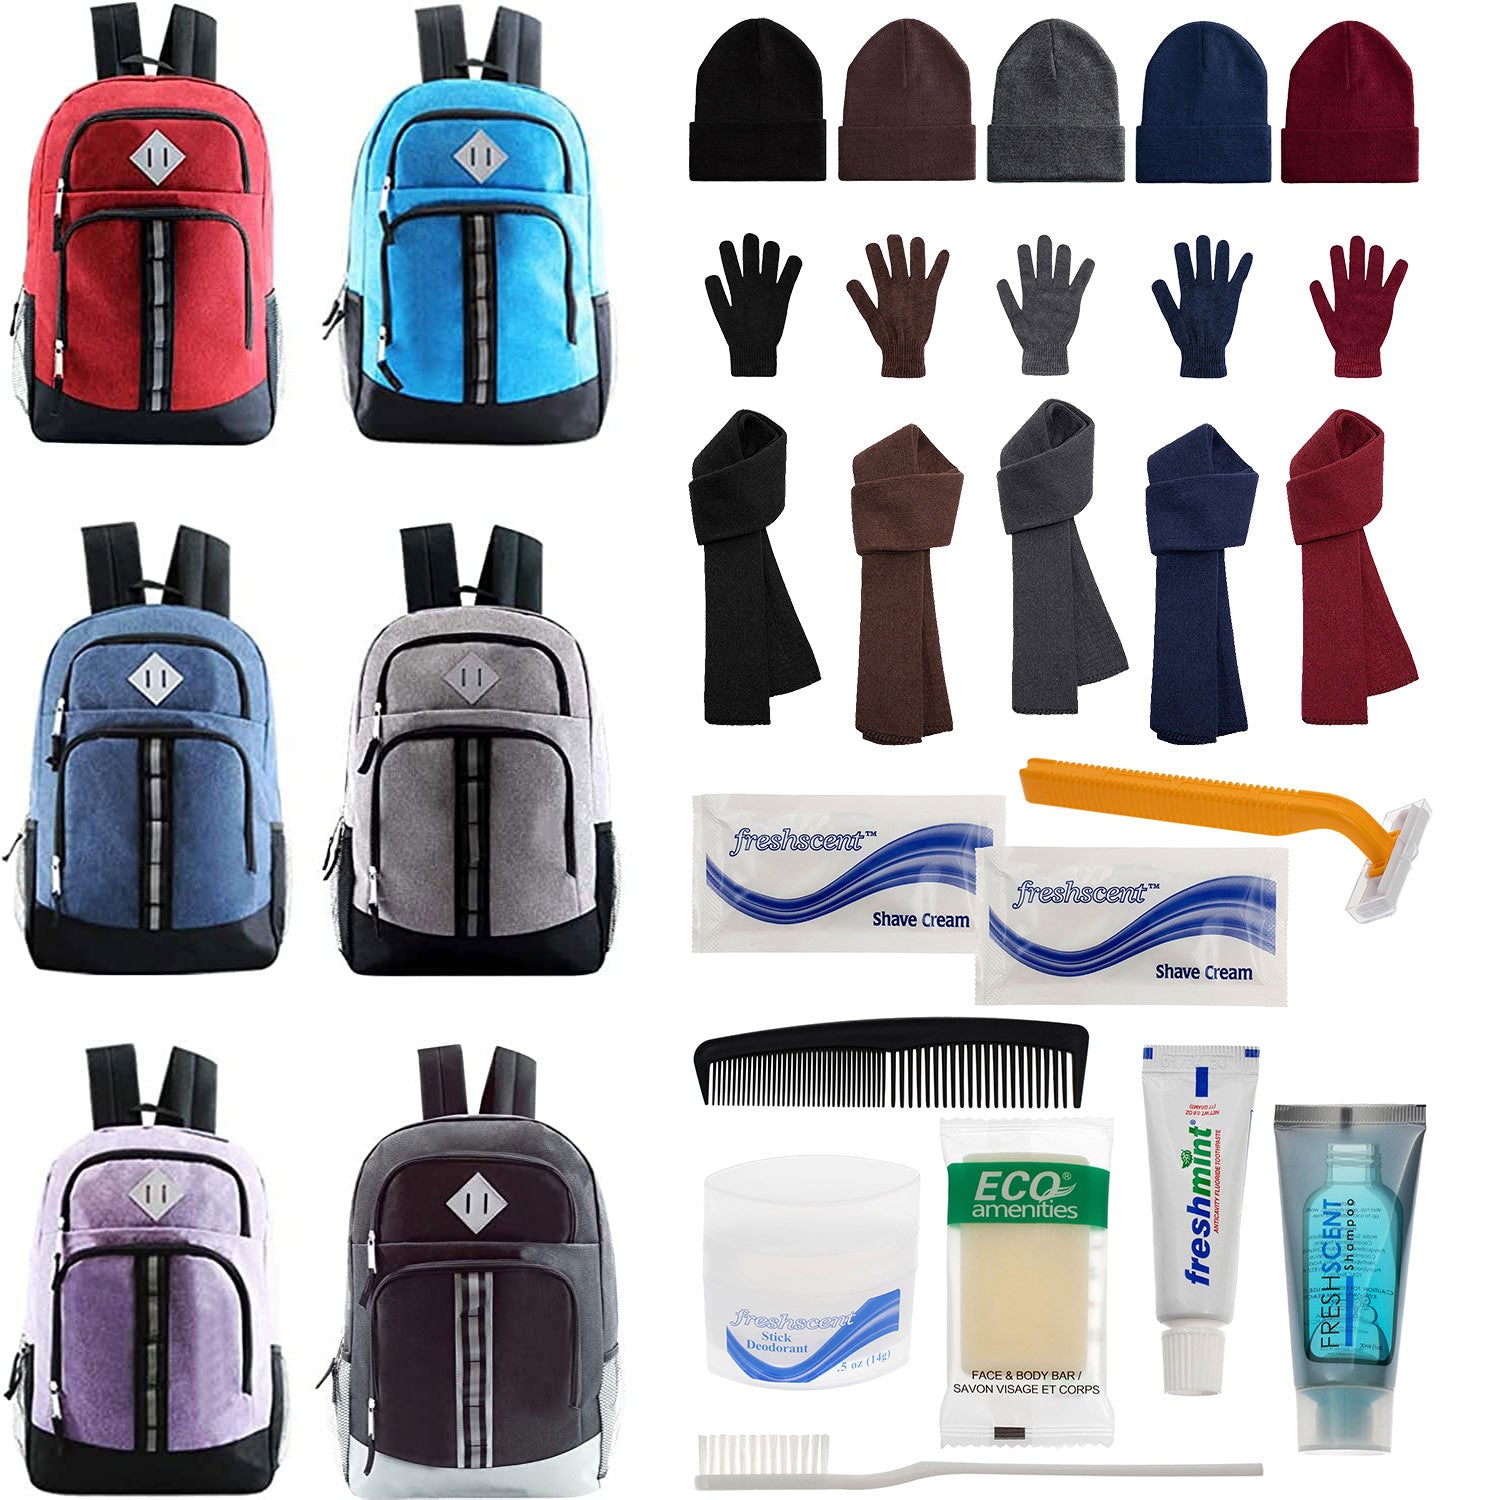 Bulk Case of 12 18" Backpacks and 12 Winter Item Sets and 12 Hygiene Kits - Wholesale Care Package - Emergencies, Homeless, Charity